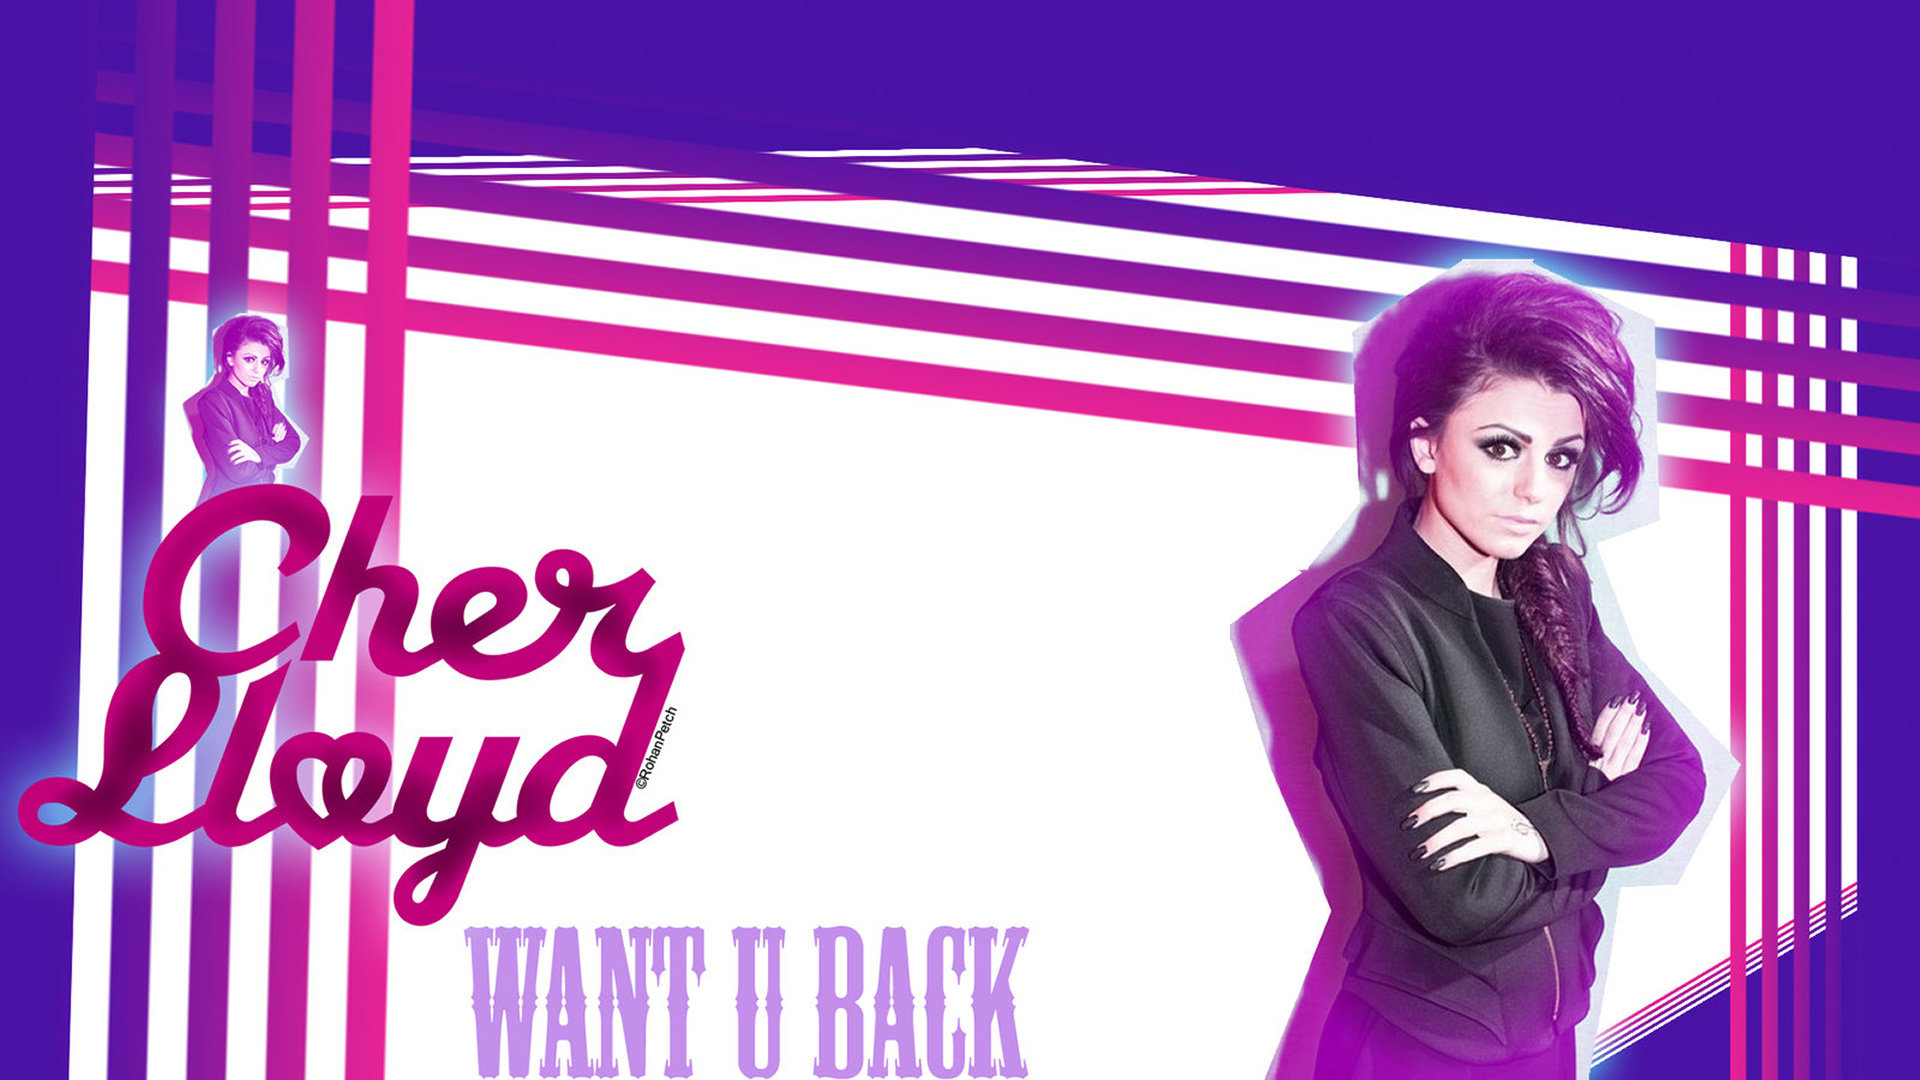 Download 1080p Cher Lloyd desktop background ID:26127 for free